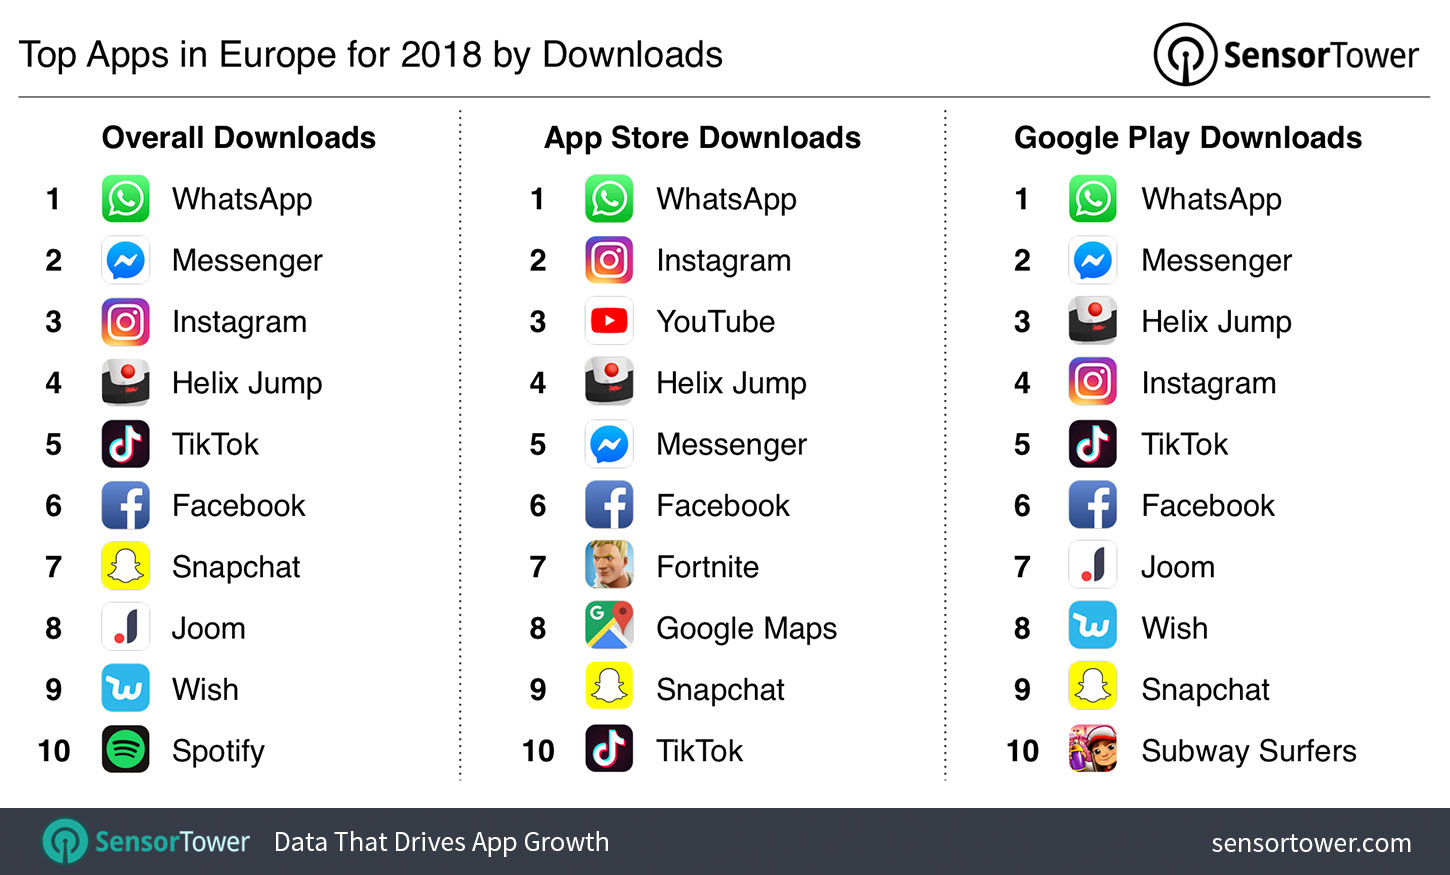 Top Apps in Europe for 2018 by Downloads